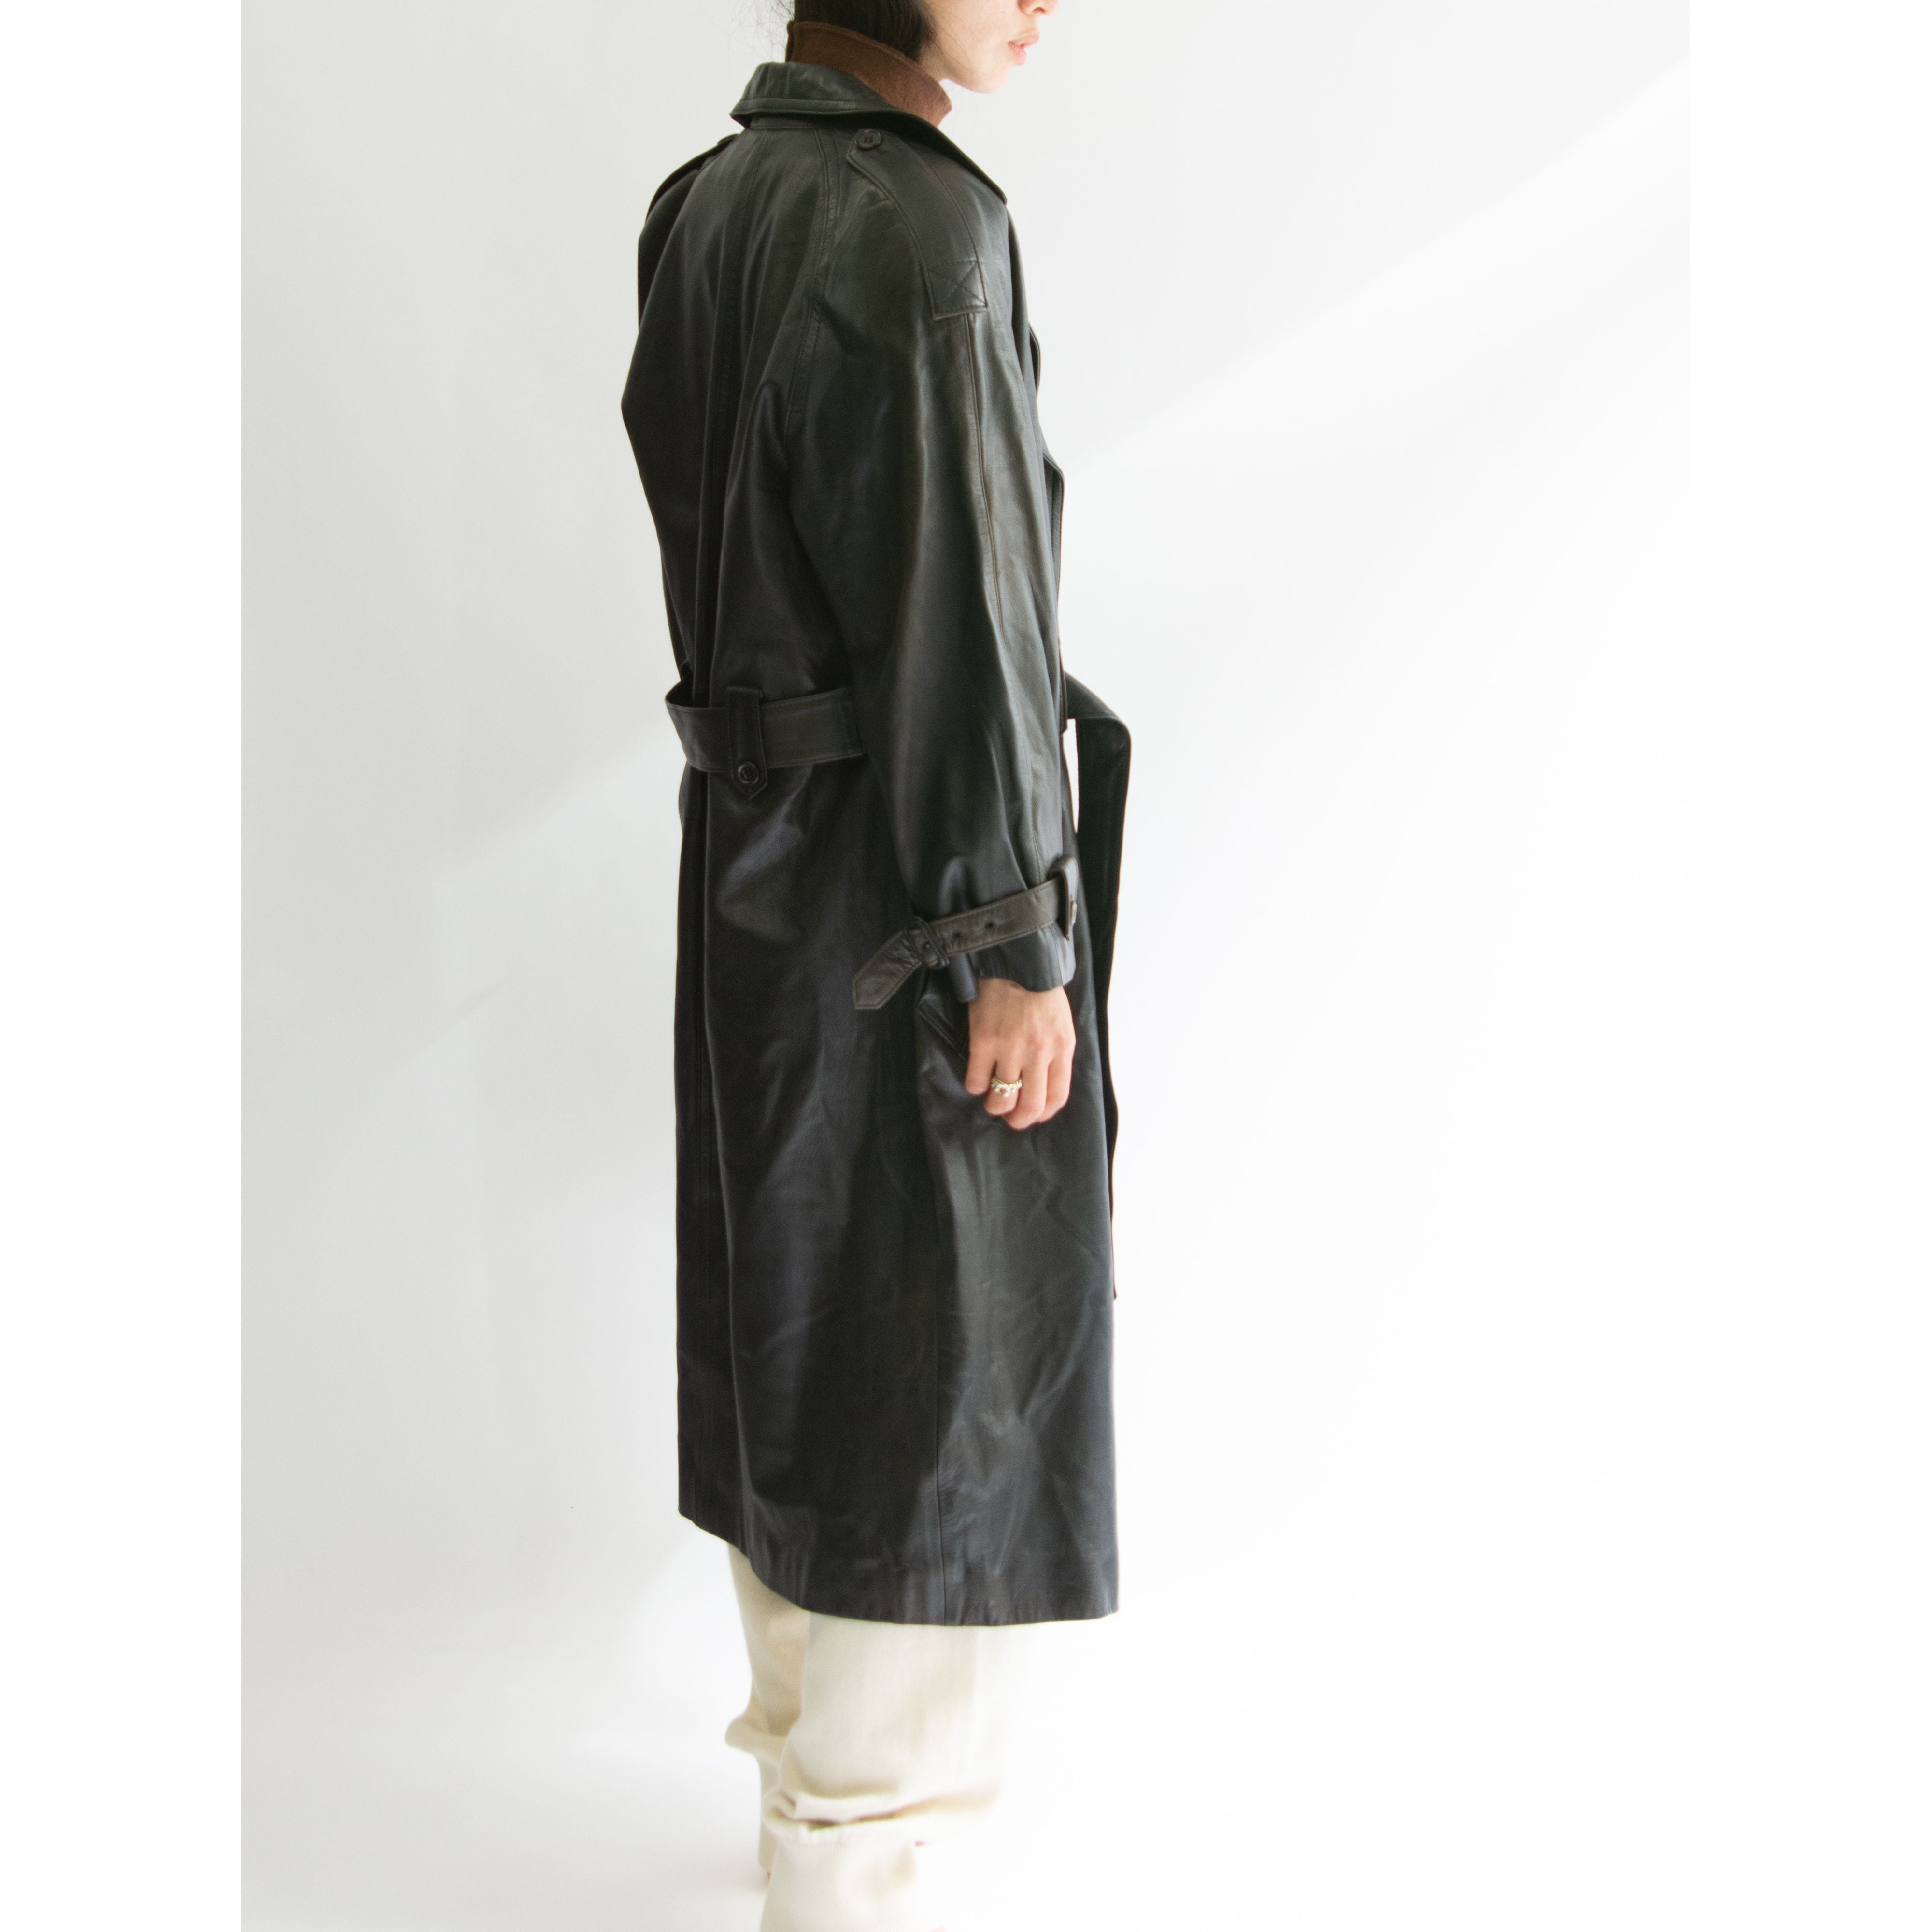 madame NICOLE】Made in Japan Leather Trench Coat（マダムニコル